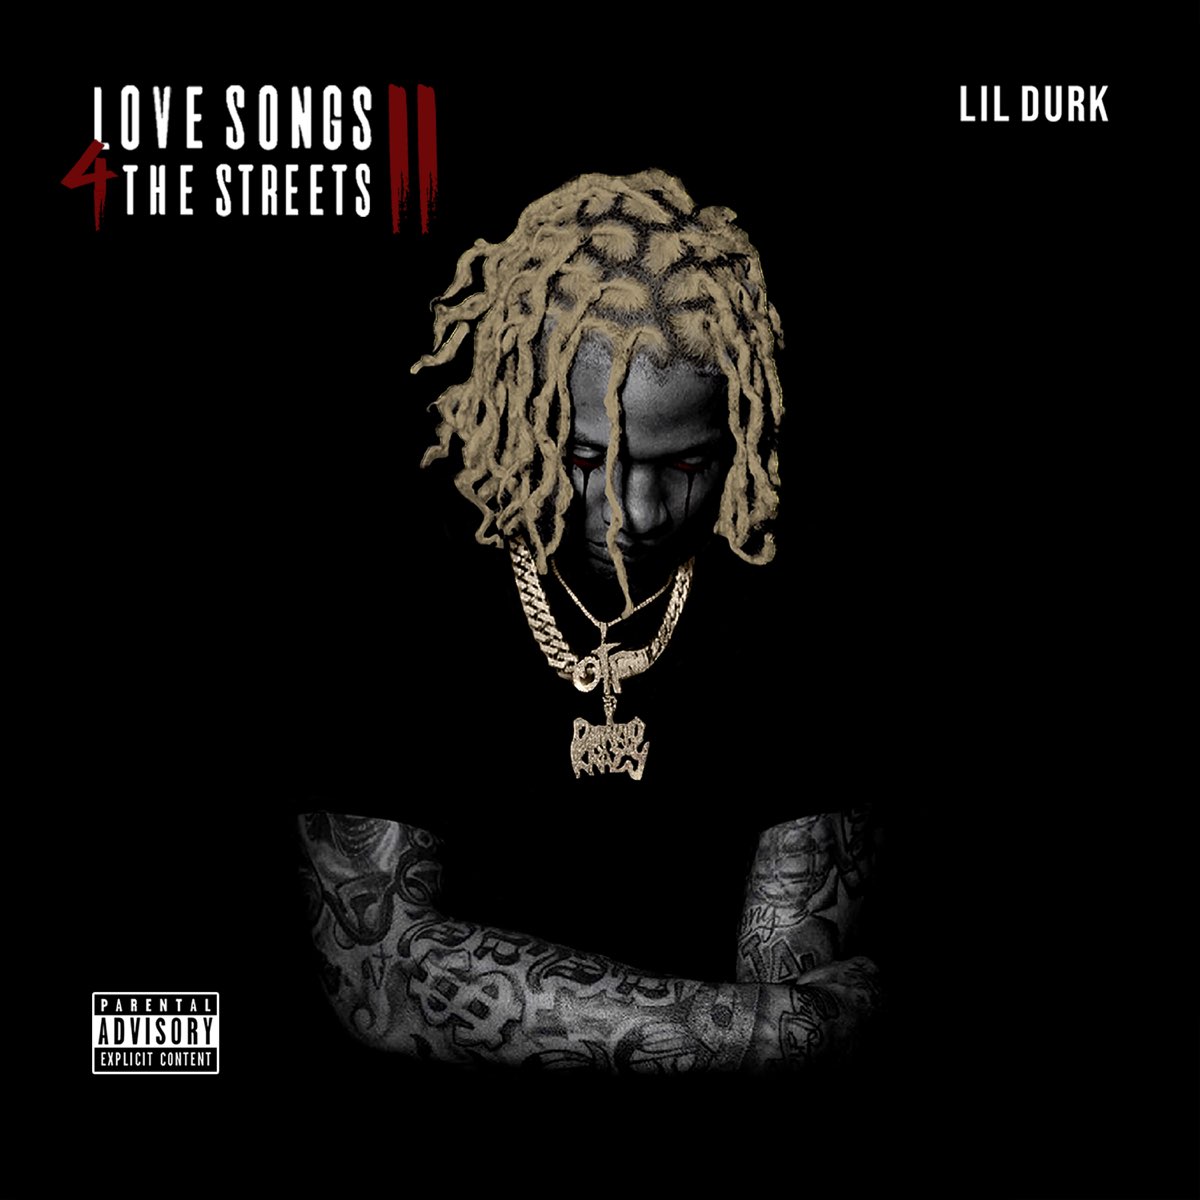 ‎Love Songs 4 the Streets 2 by Lil Durk on Apple Music